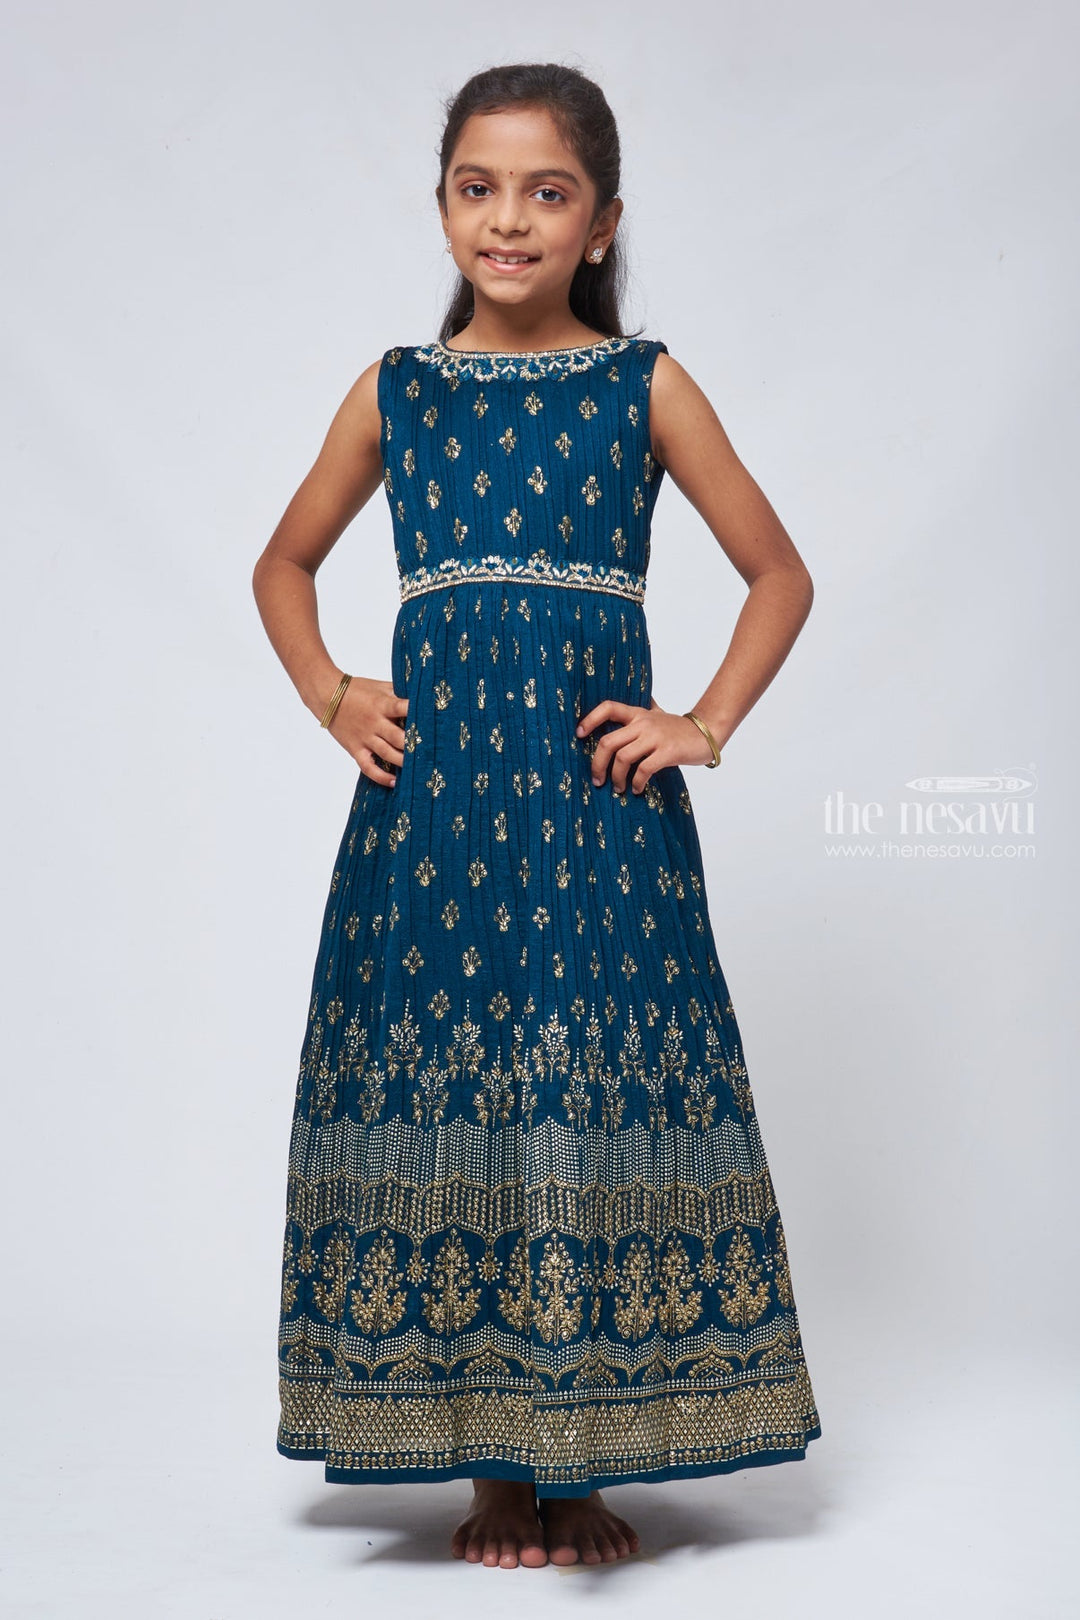 The Nesavu Silk Gown Childrens Floral Anarkali Emerald Elegance with Rhine Stones Embroidery - Traditional Ethnic Gown for Girls Nesavu 24 (5Y) / Blue / Chinnon GA141A-24 Long Anarkali For Girls | Little Girl Anarkali Outfit | The Nesavu